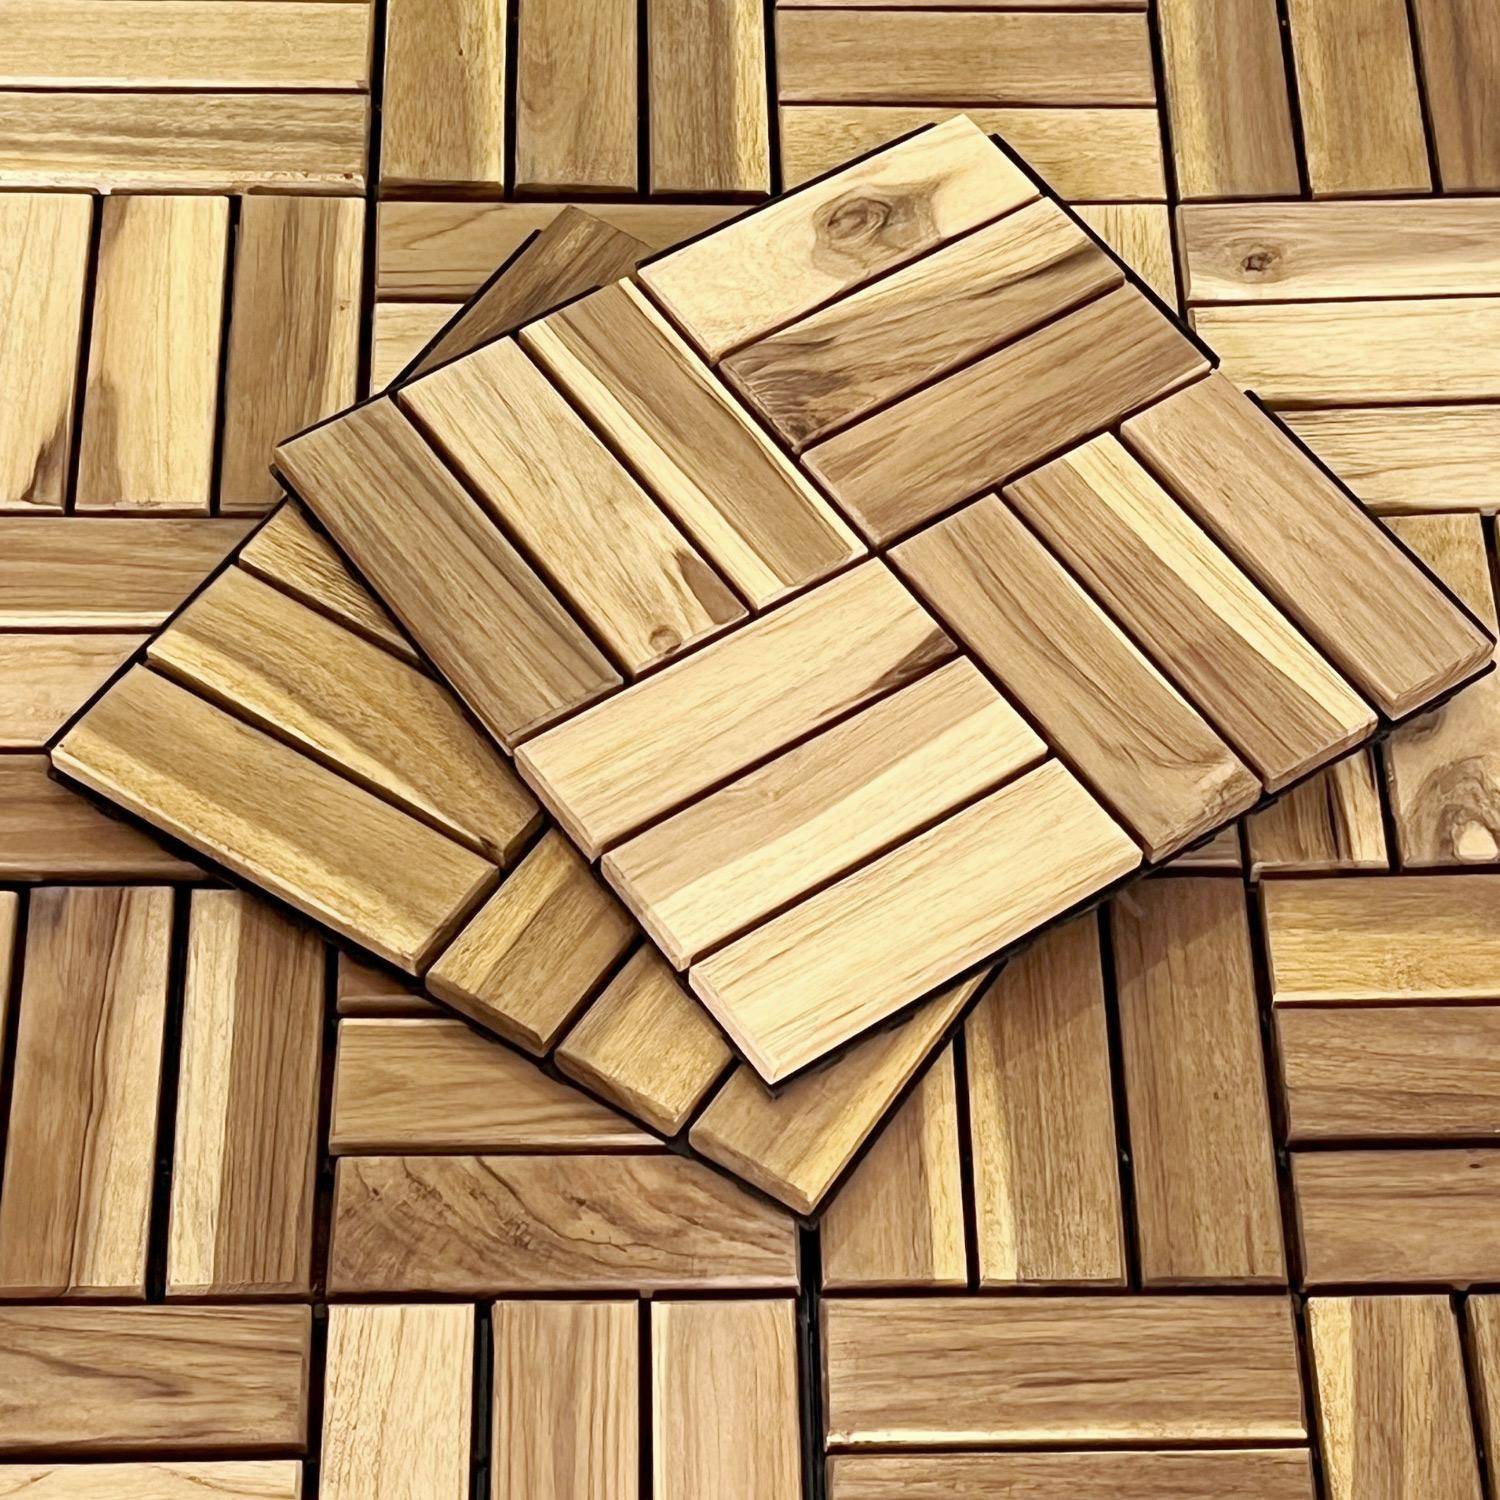 Batch of 36 acacia wood decking tiles 30x30cm, square pattern, clip-on,sweeek,Photo5